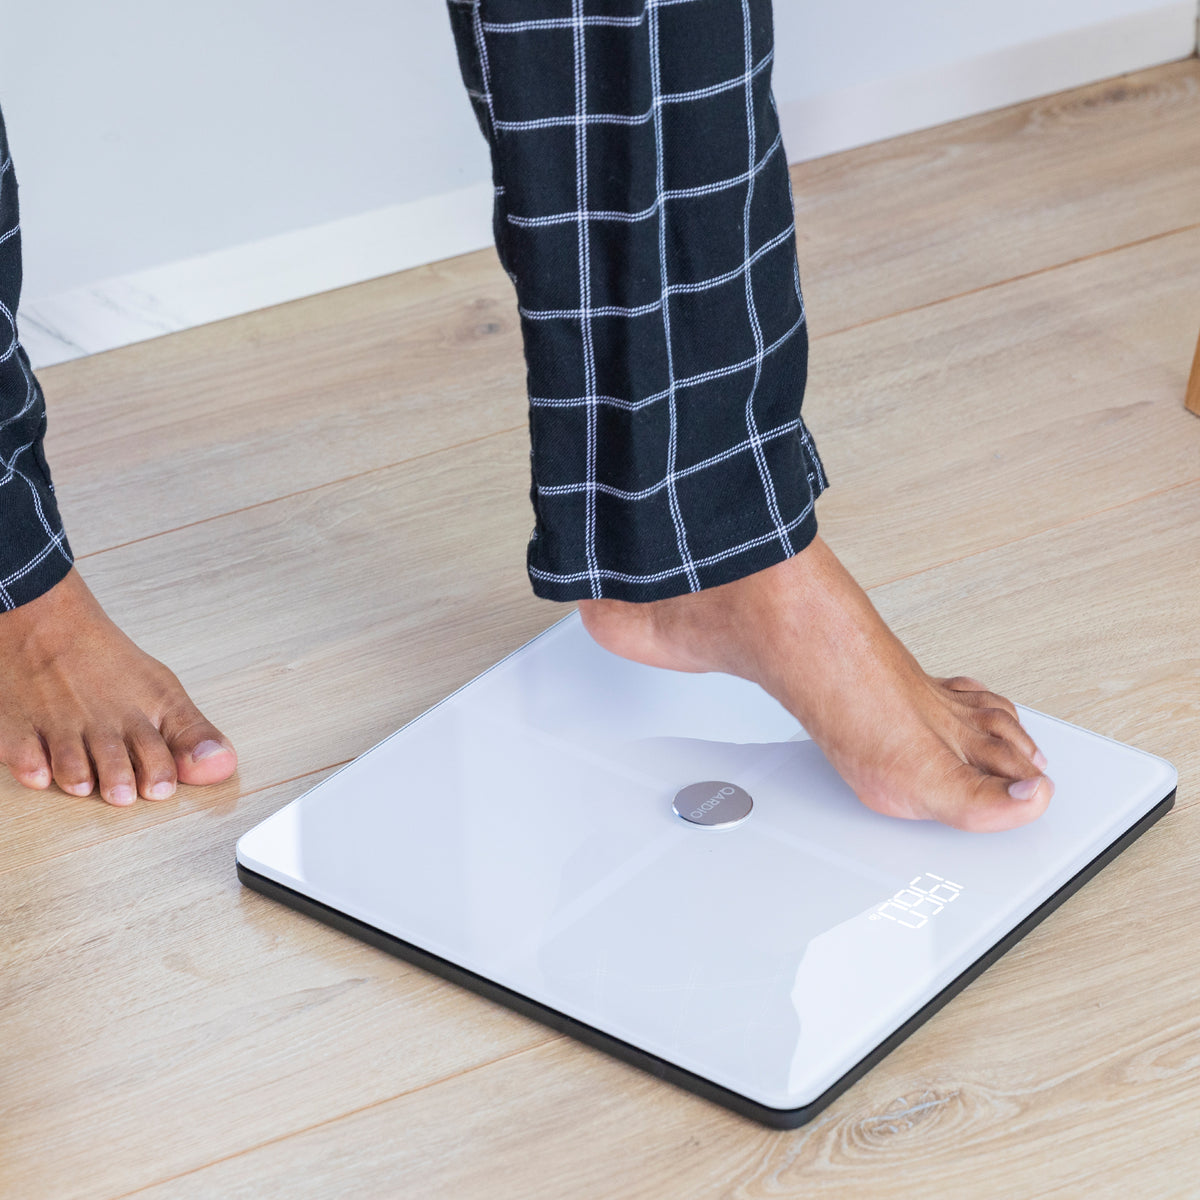 Monitor Your Weight and Health with QardioBase Wi-Fi Smart Scale